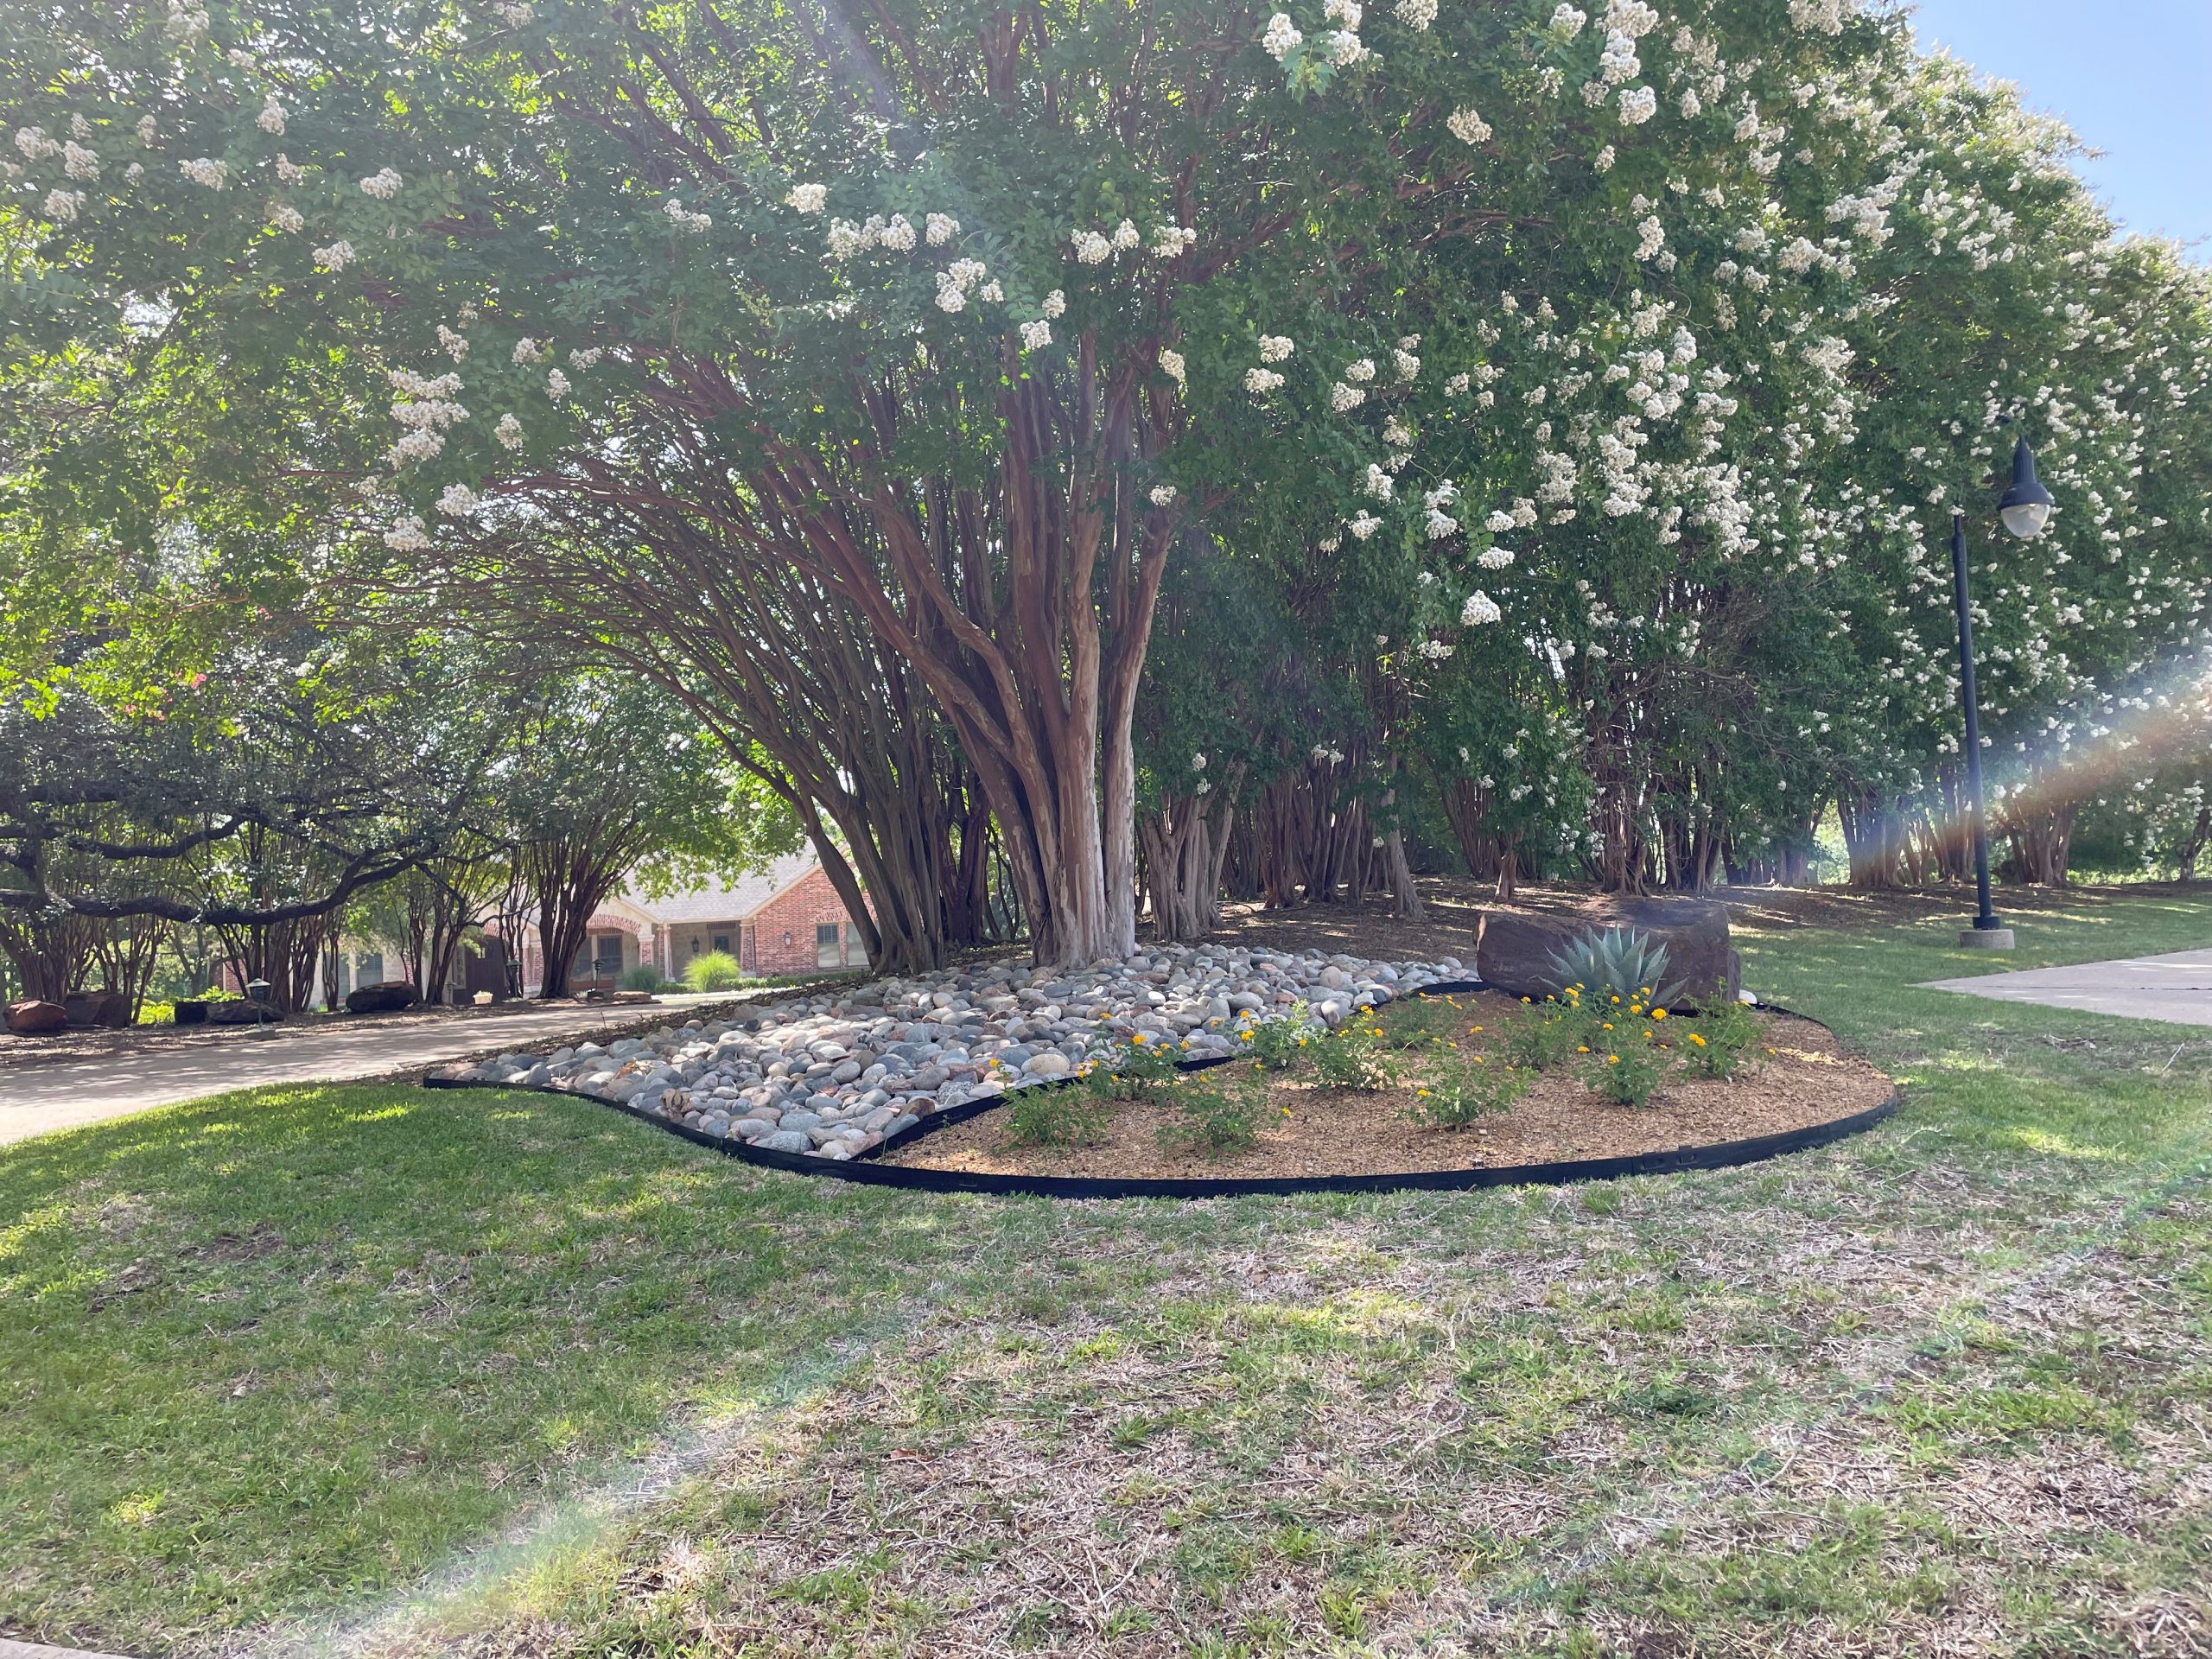 Denton and Dallas campuses receive award for landscaping -